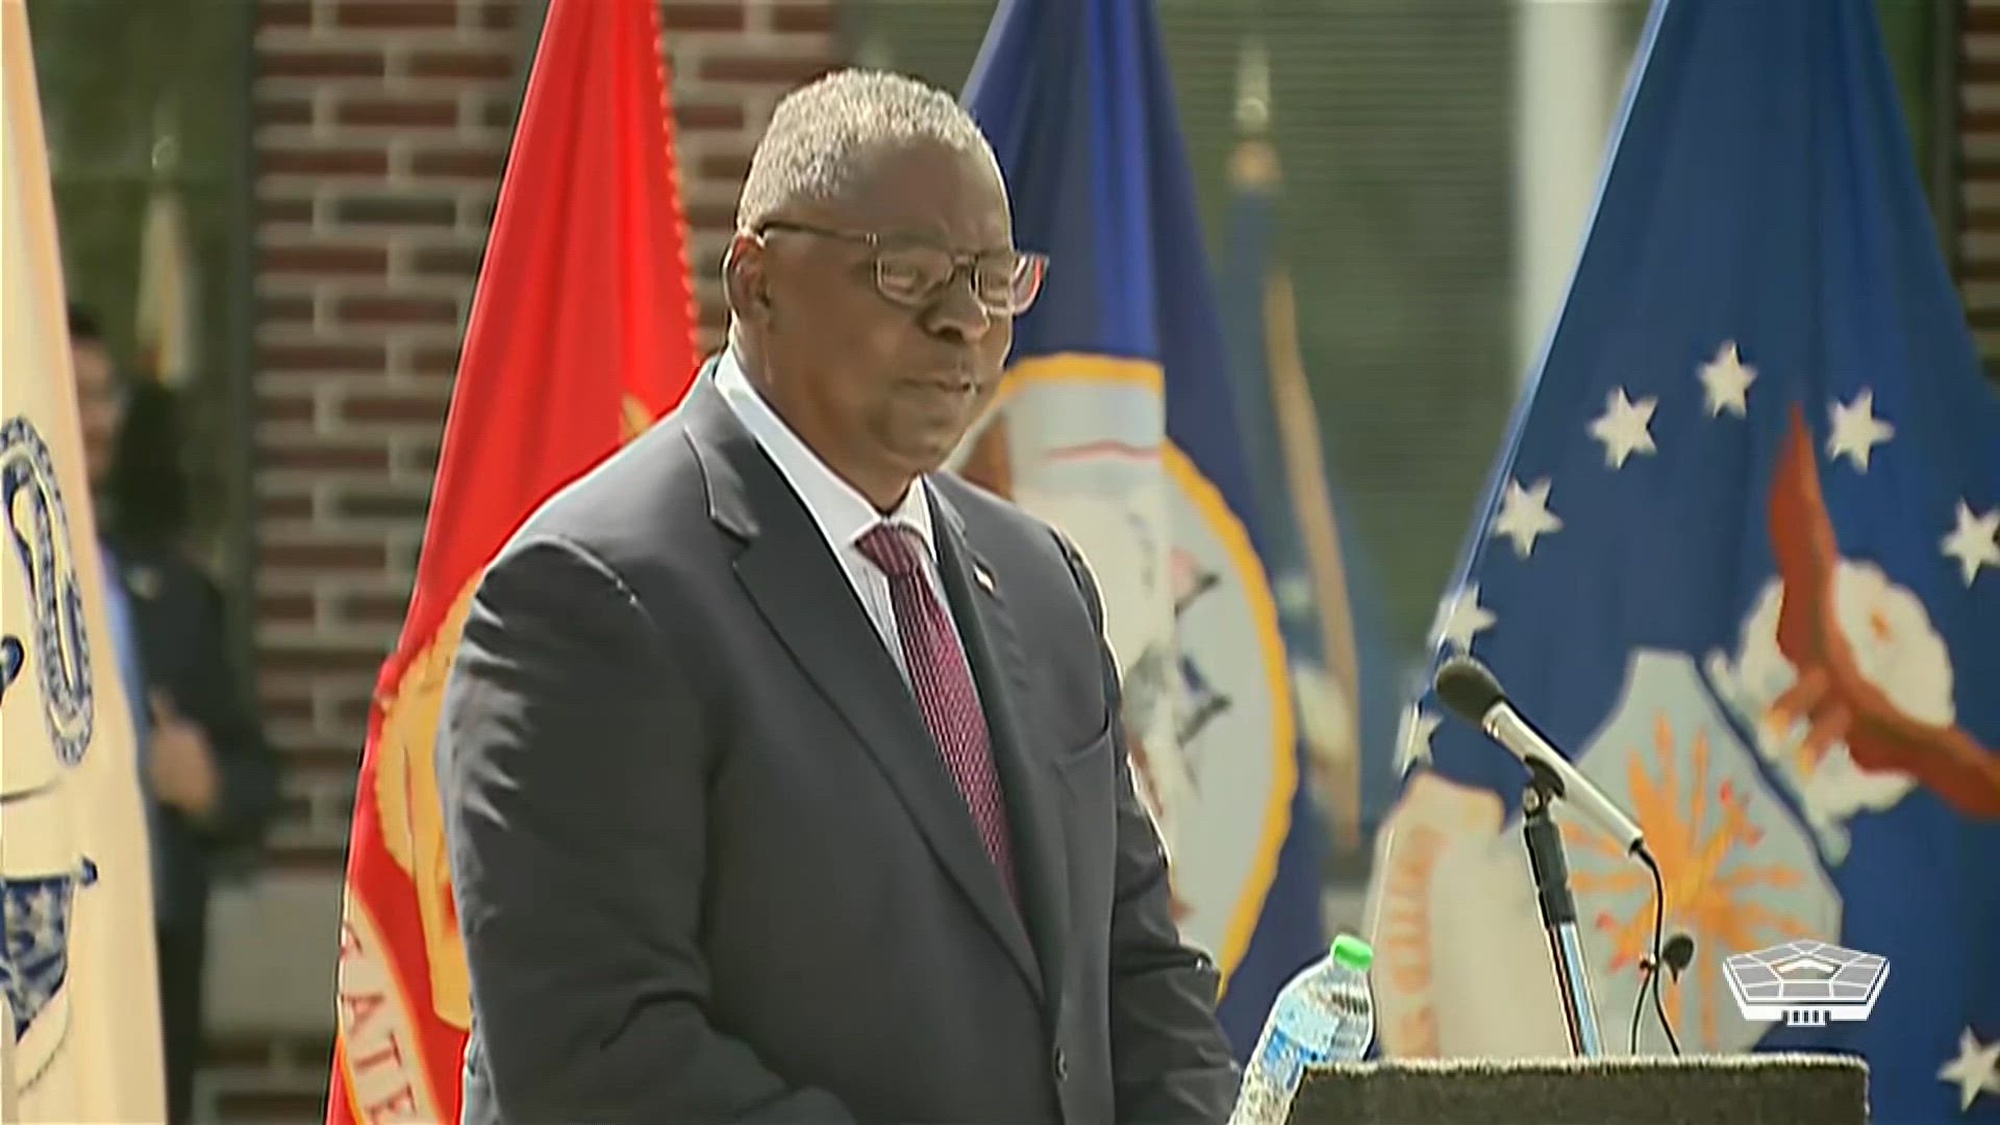 In celebration of the 50th anniversary of the all-volunteer military, Secretary of Defense Lloyd J. Austin III swears in 90 new recruits at Fort Meade, Md.